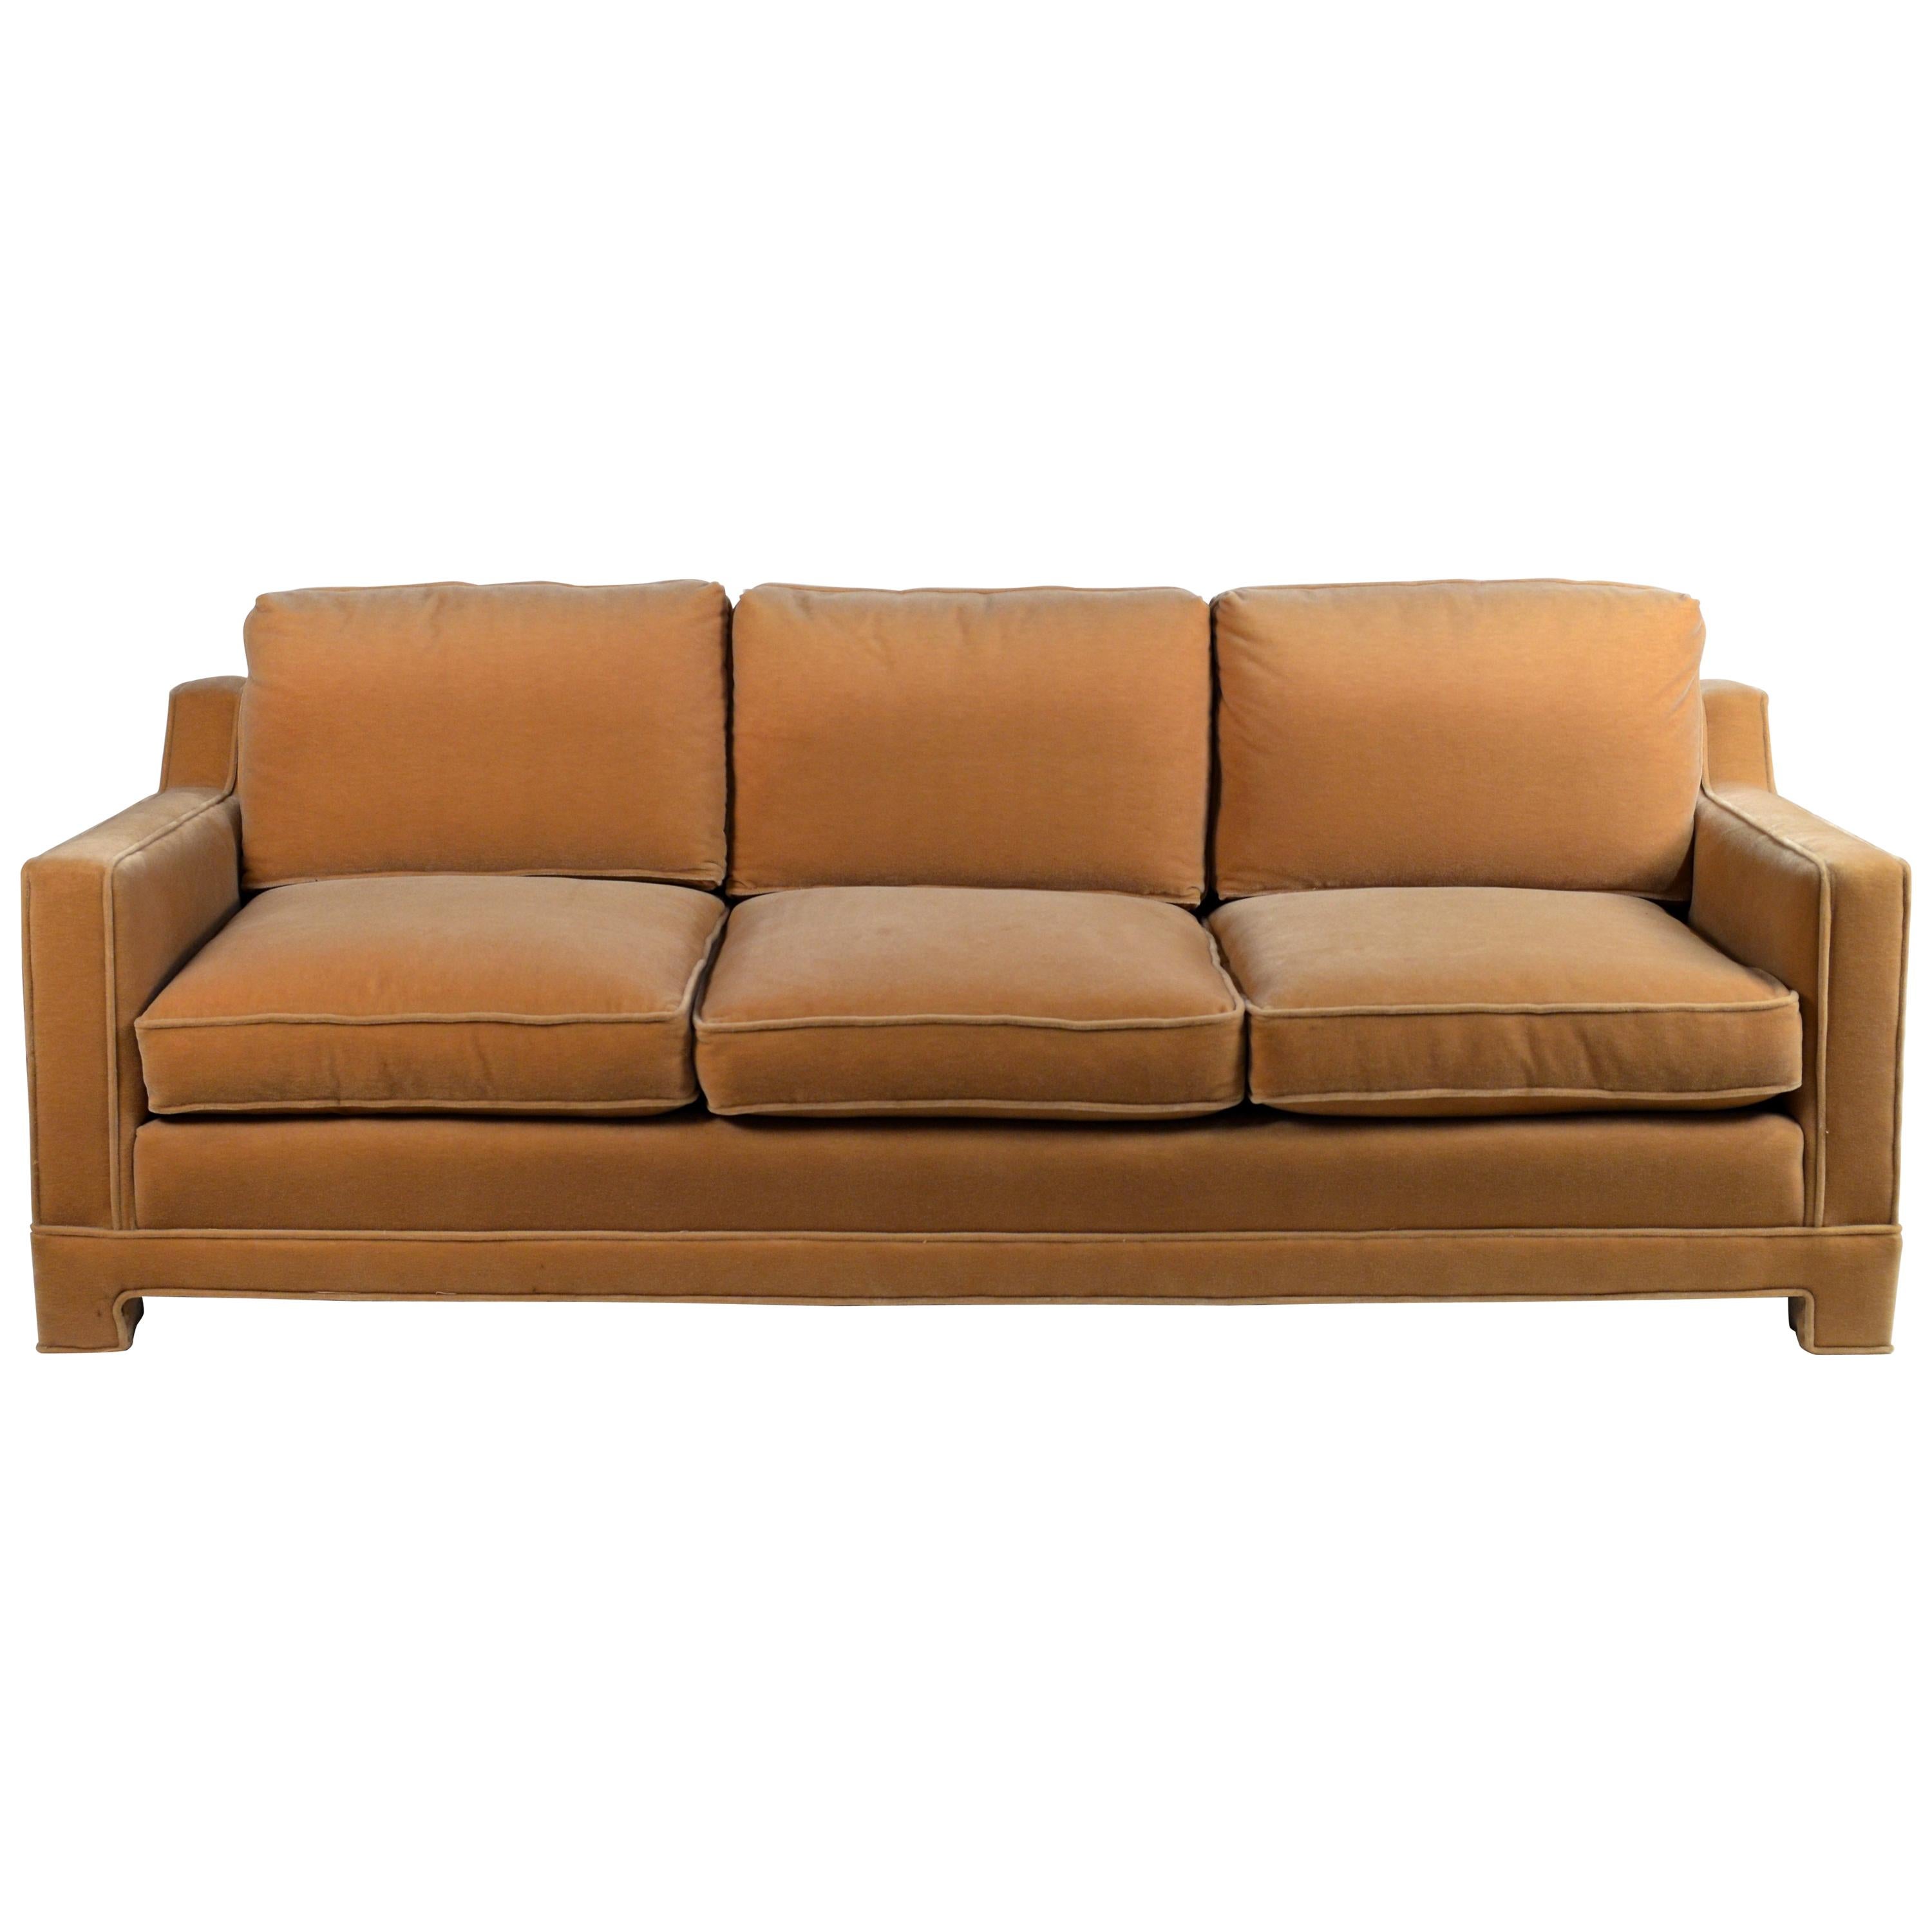 The 'Verneuil' Mohair Sofa by Design Frères